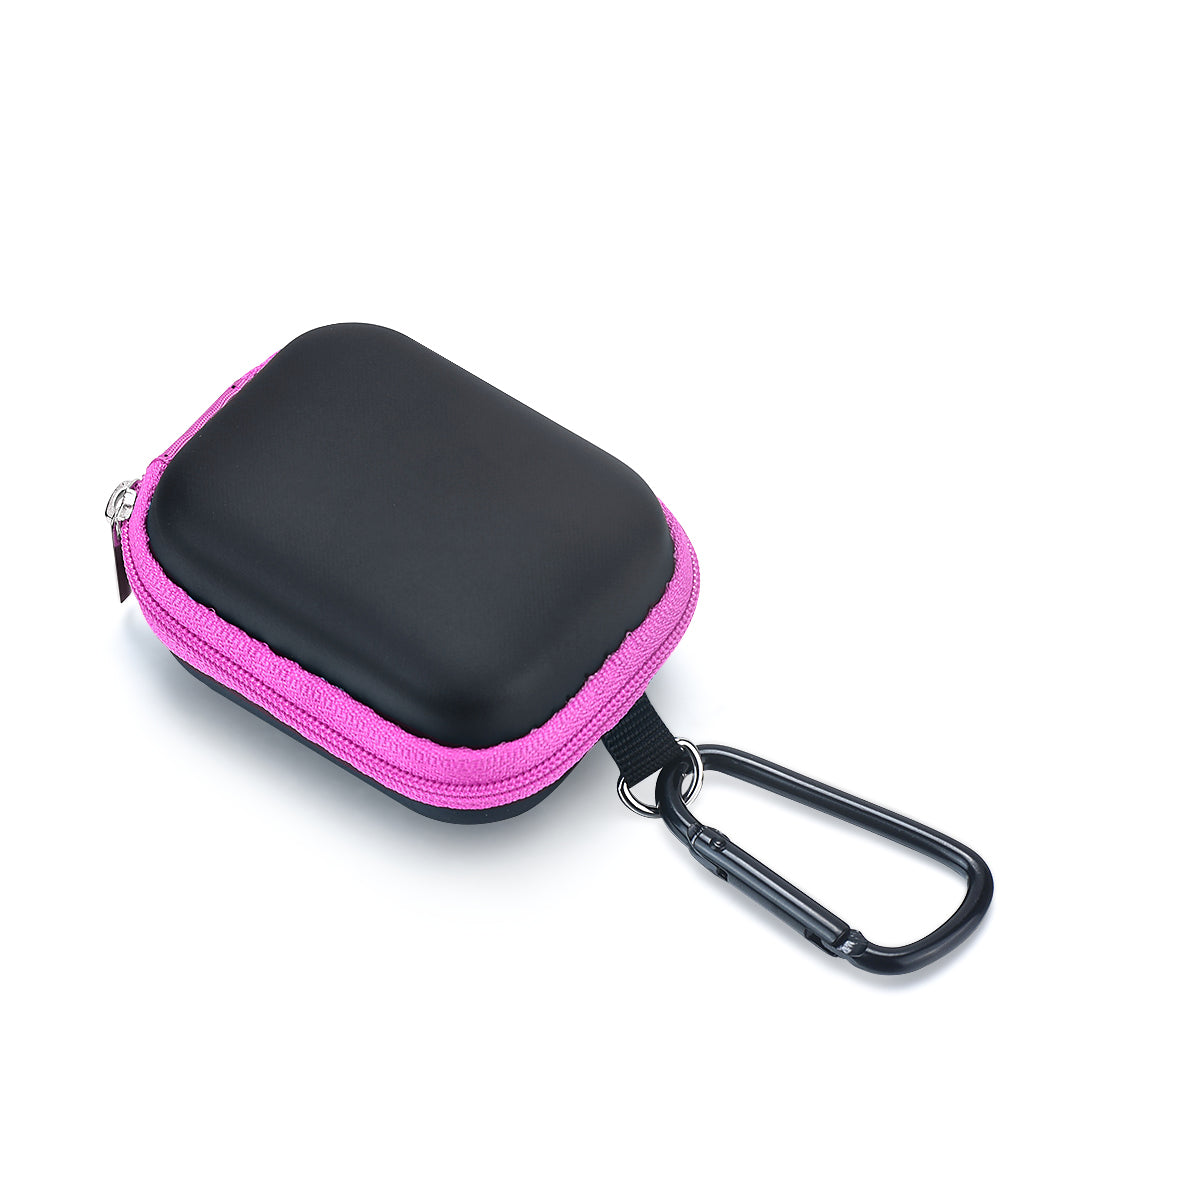 Essential oil carrying case